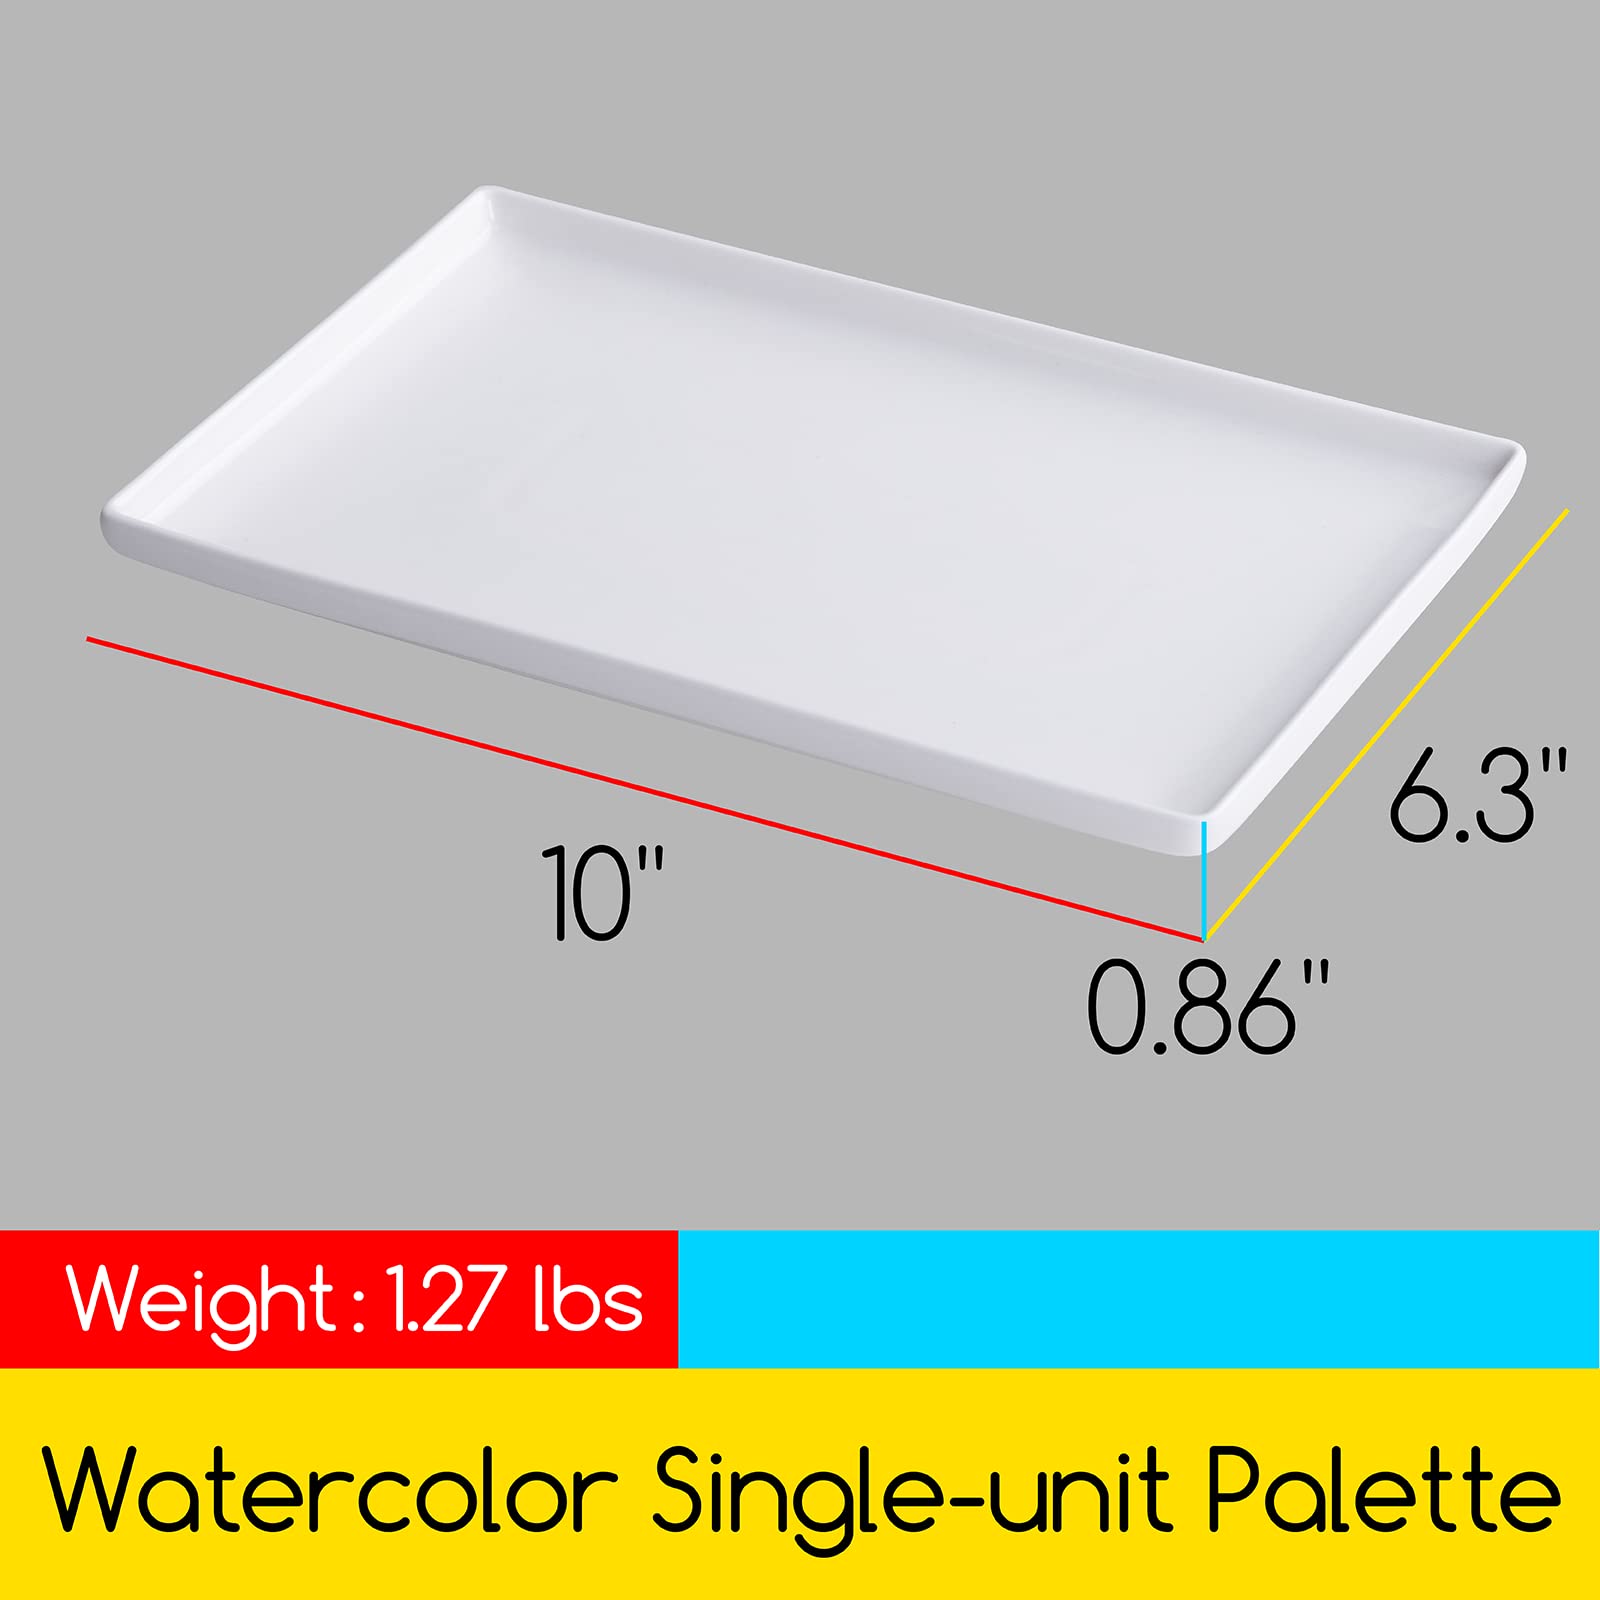  MEEDEN Large 32-Well Ceramic Watercolor Palette with